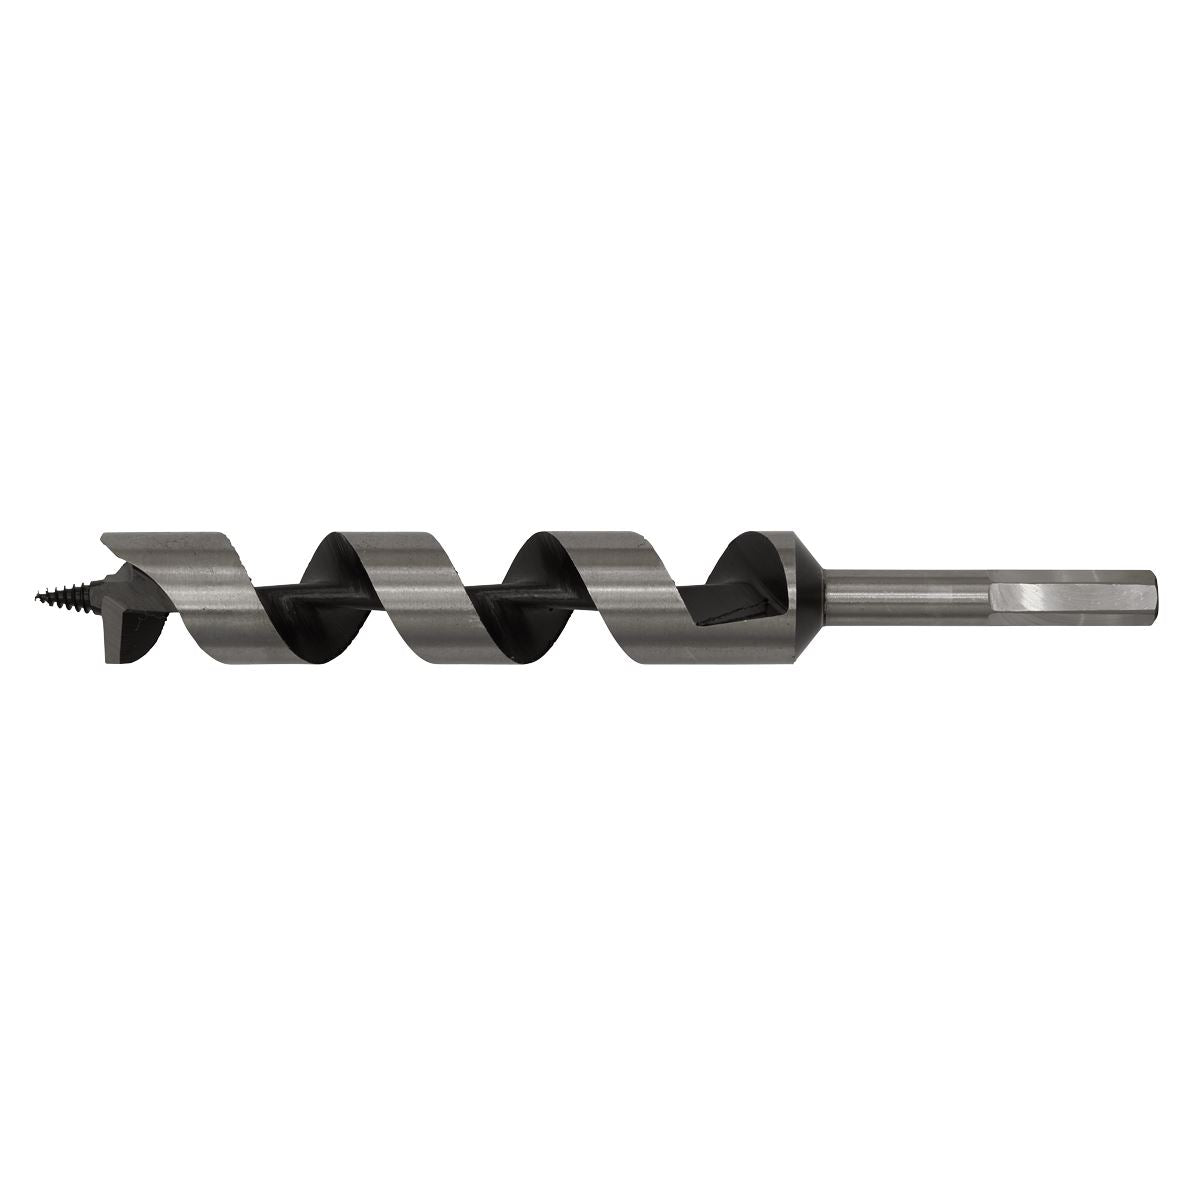 Worksafe by Sealey Auger Wood Drill Bit 28mm x 235mm